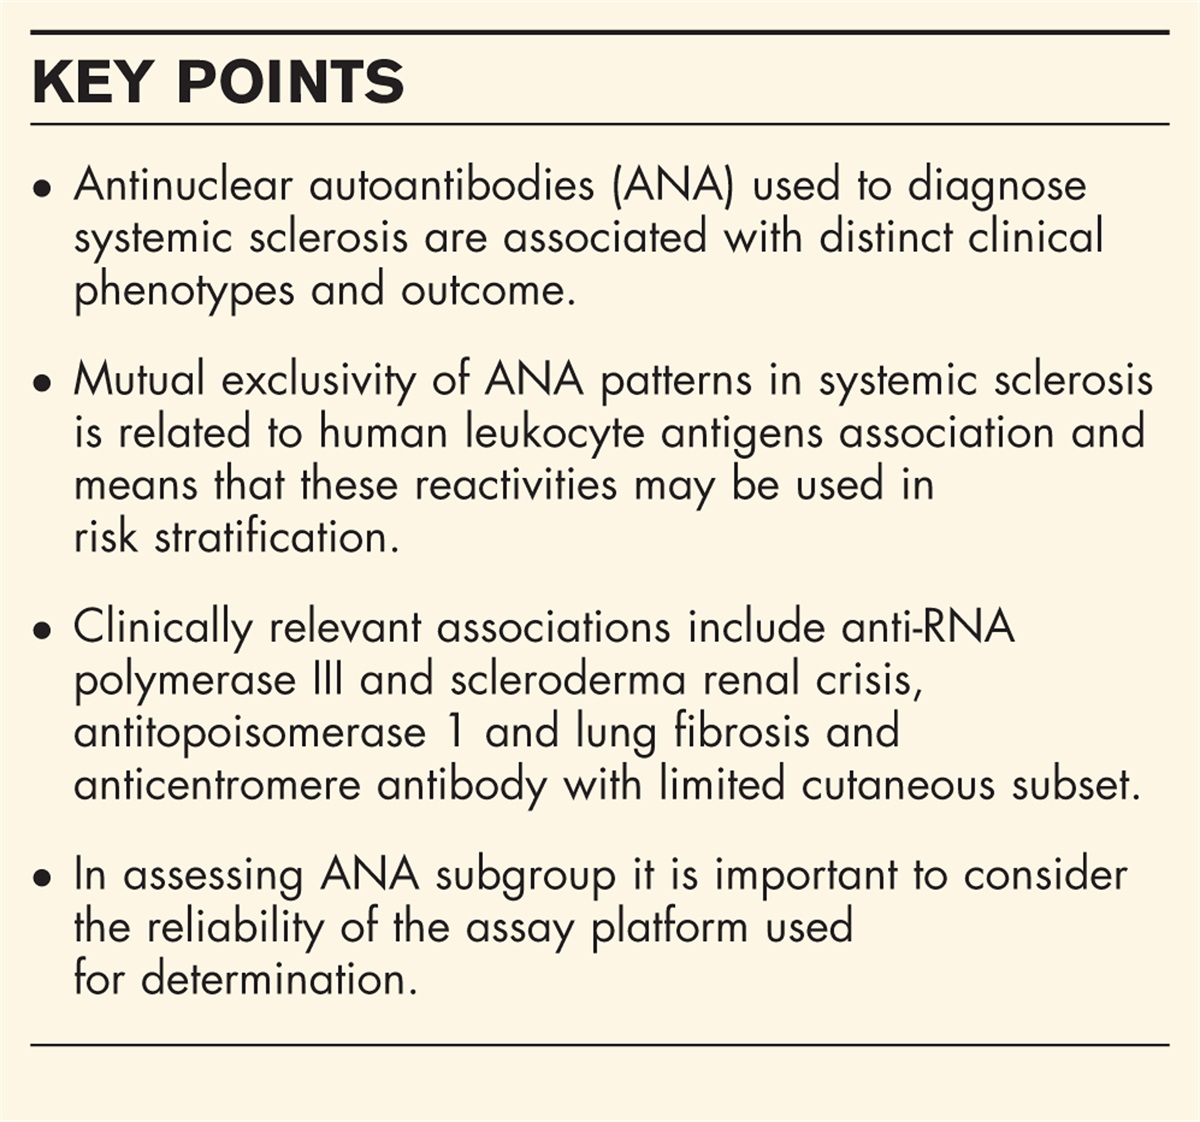 Scleroderma autoantibodies in guiding monitoring and treatment decisions